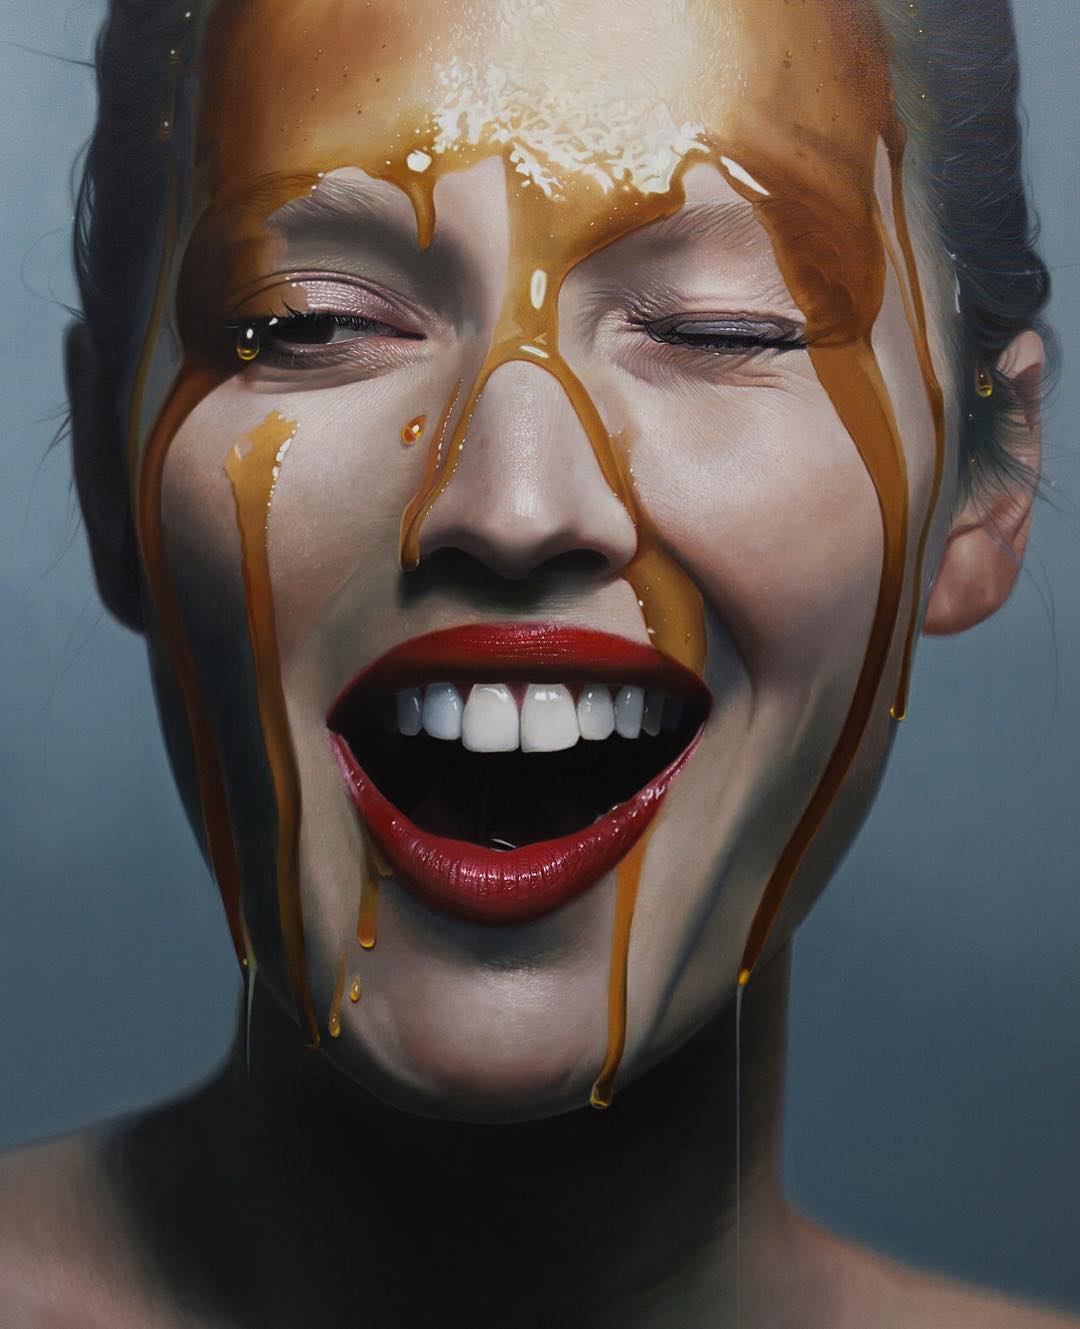 Mike Darkas – Hyper-realistic paintings of @tonigarrn – oil on canvas 145x195cm